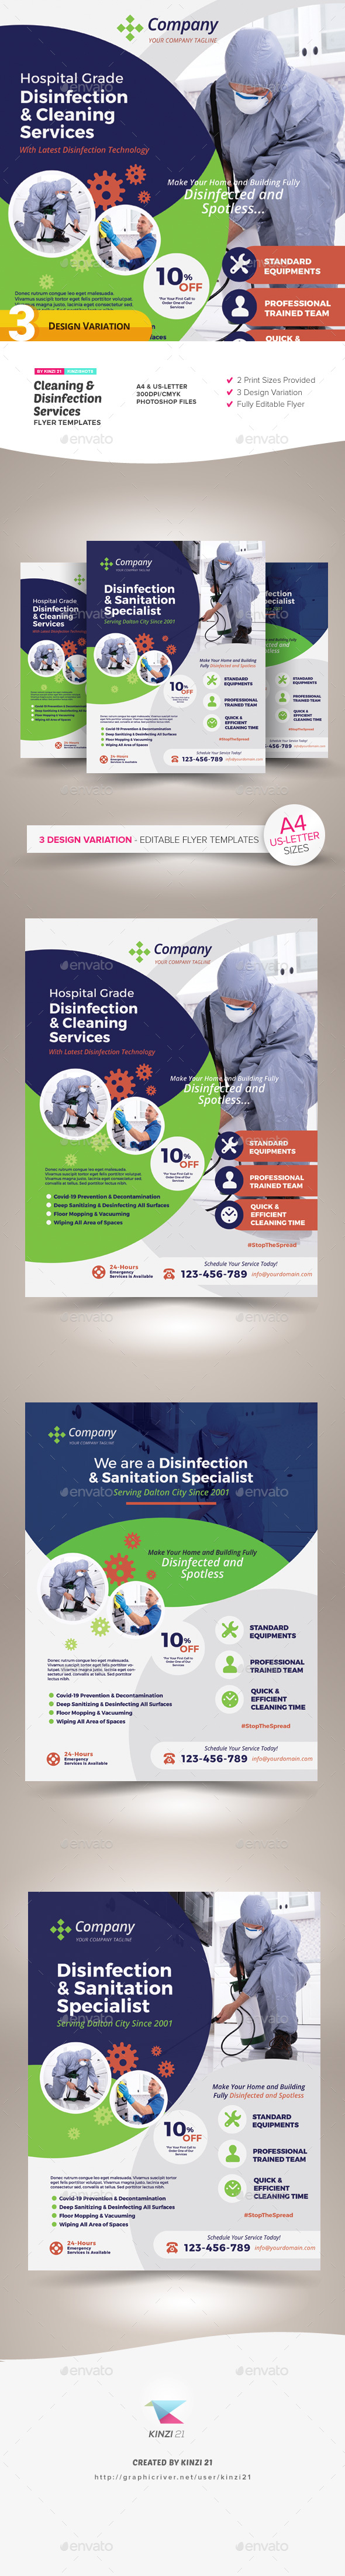 Cleaning & Disinfection Services Flyer Templates